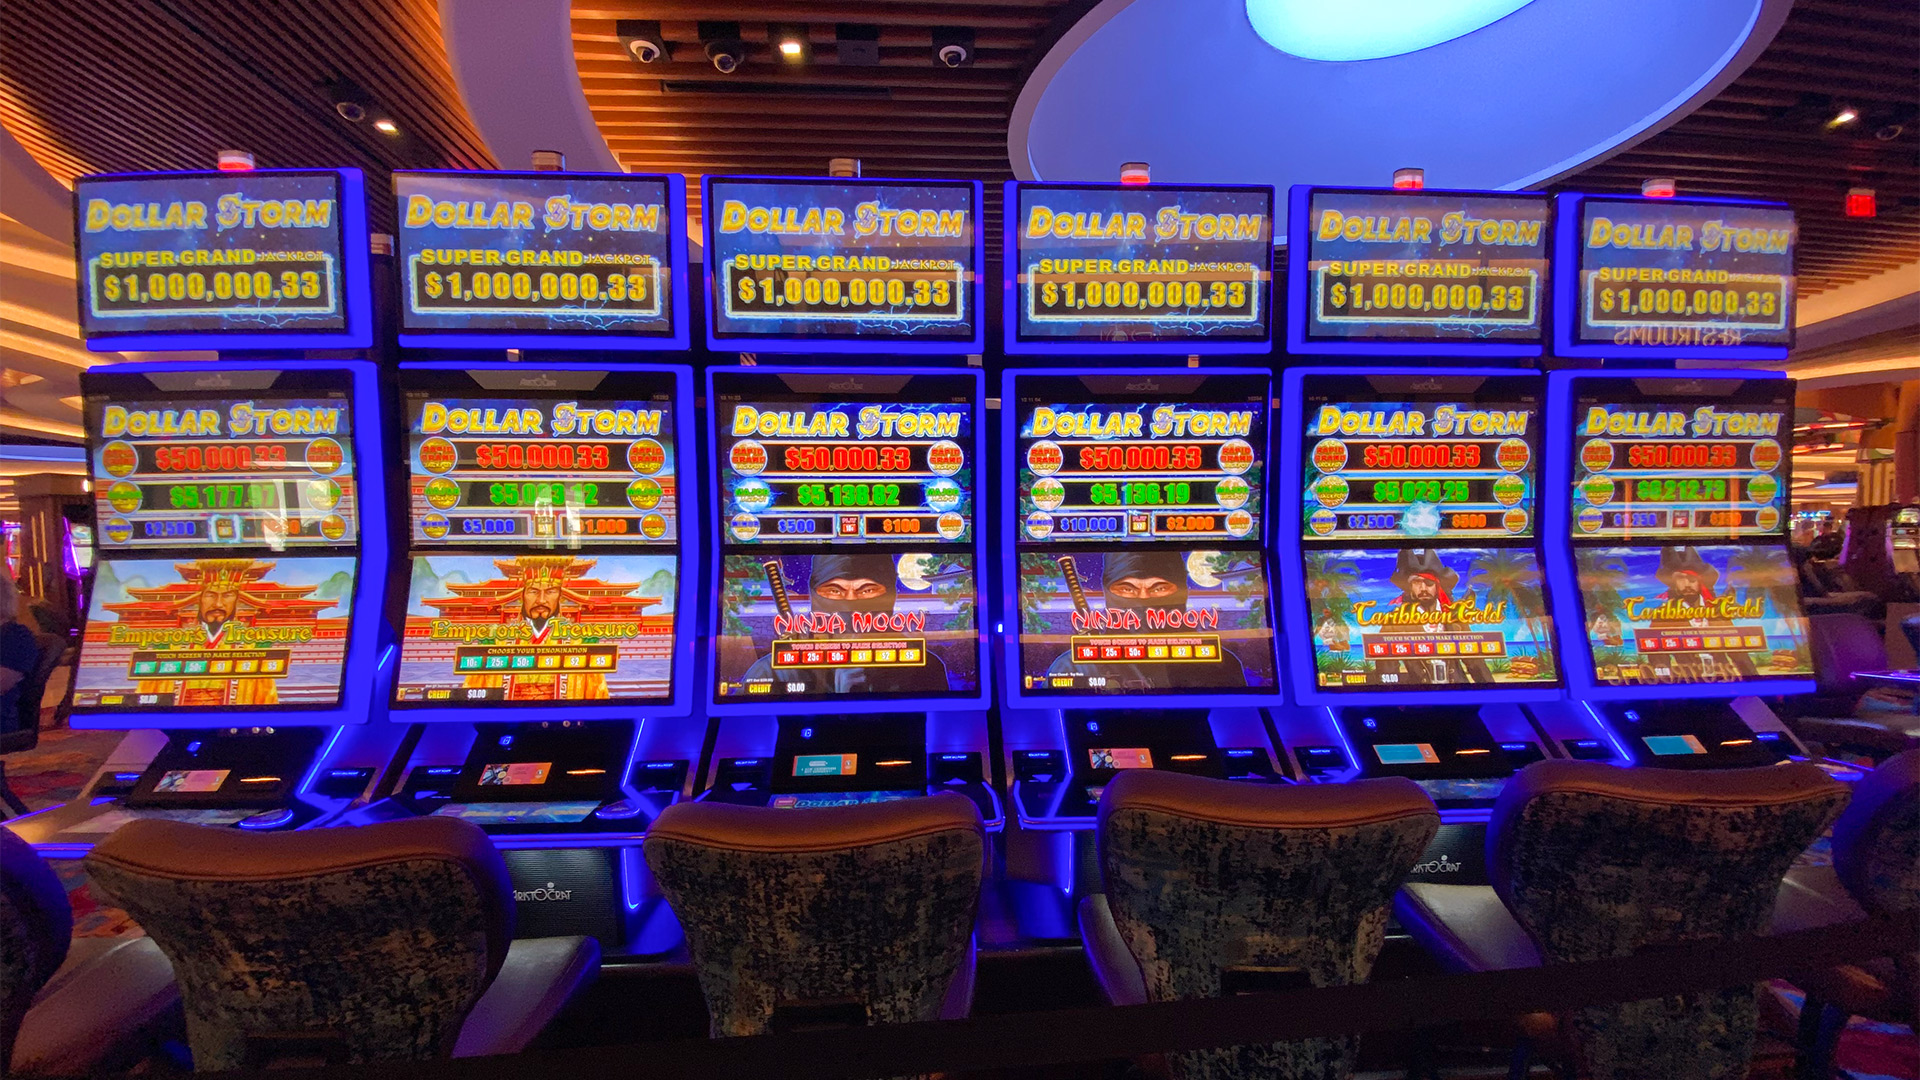 Aristocrat launches all-new Greenback Storm slot at Tricky Rock’s Florida casinos with a progressive jackpot starting off at $1M | Yogonet International